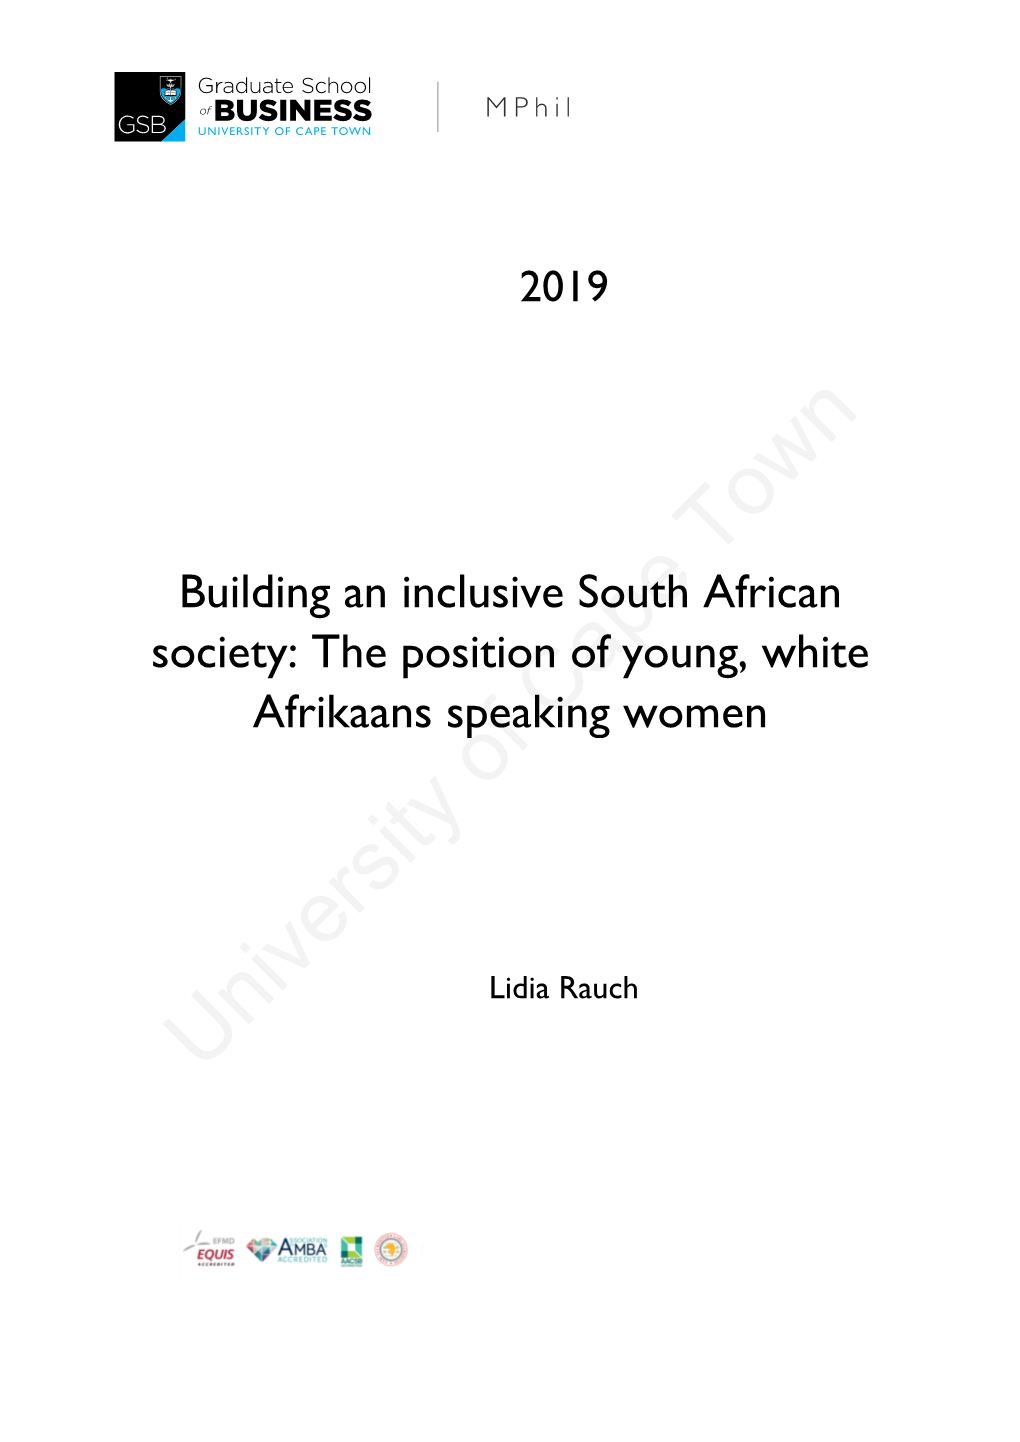 The Position of Young, White Afrikaans Speaking Women